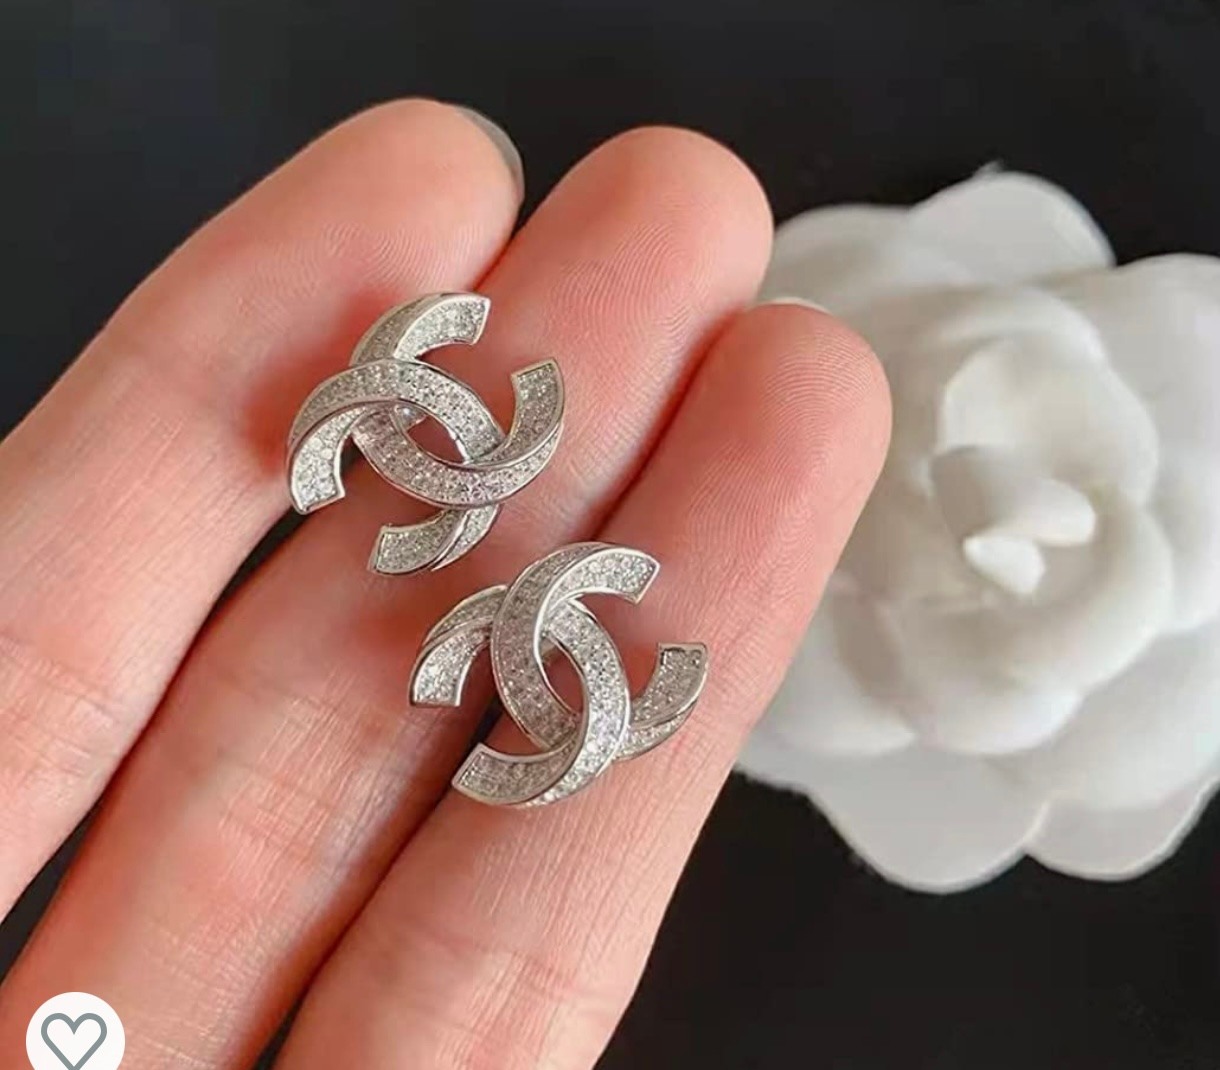 Shop CHANEL VIP PRICE CHANEL AB8969 EARRINGS Fringes SILVER VIP PRICE  (AB8969 B08690 NJ338) by FORMIDABLE